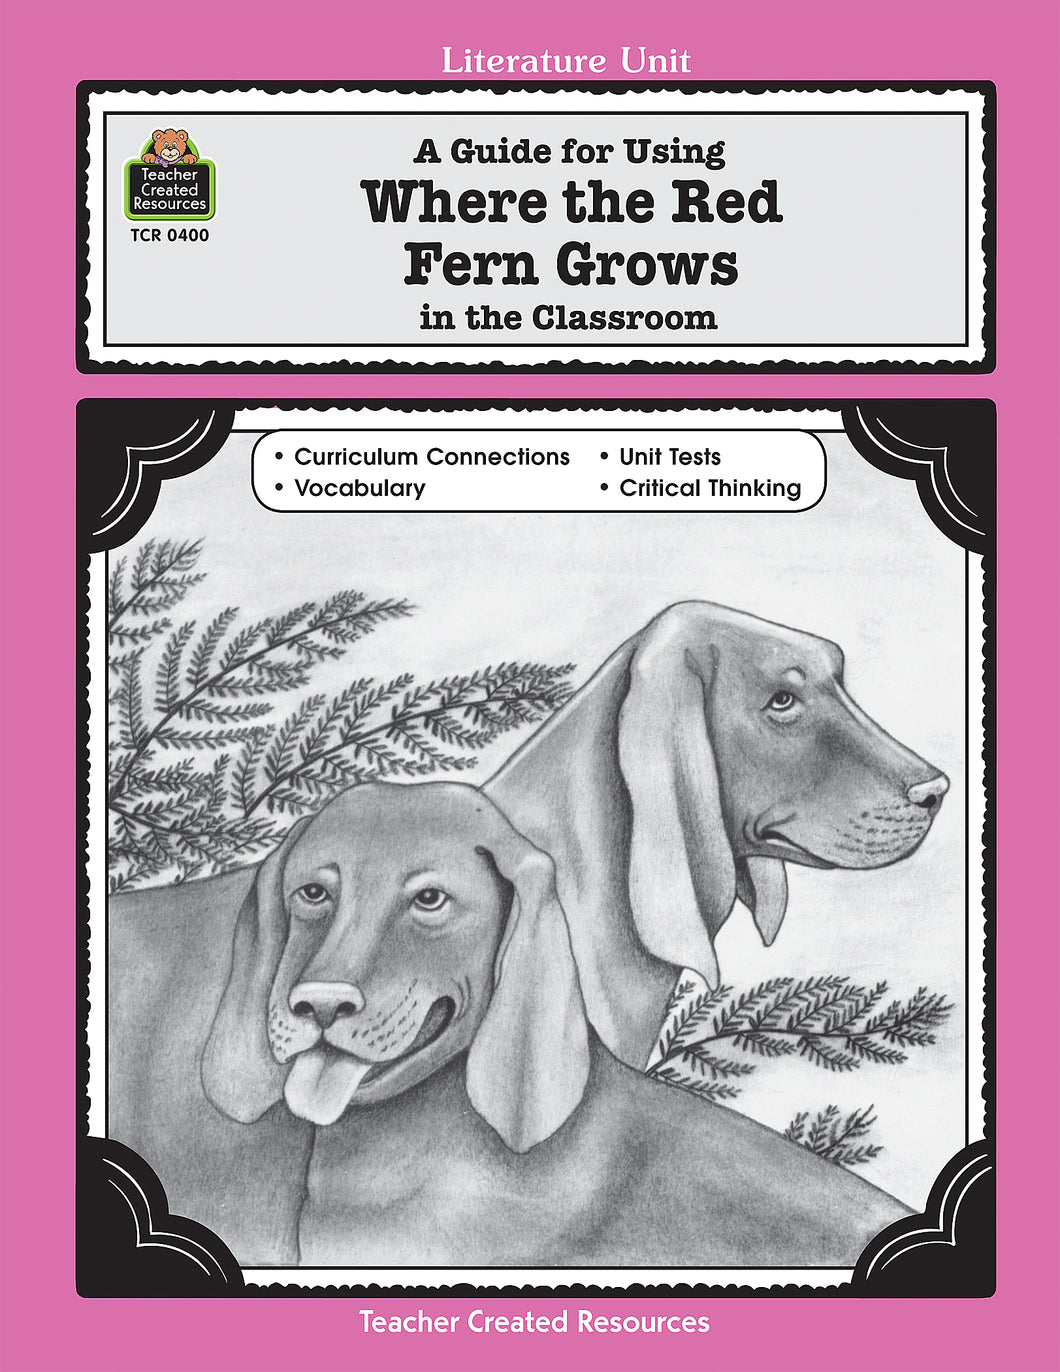 Literature Unit: A Guide for Using Where the Red Fern Grows in the Classroom